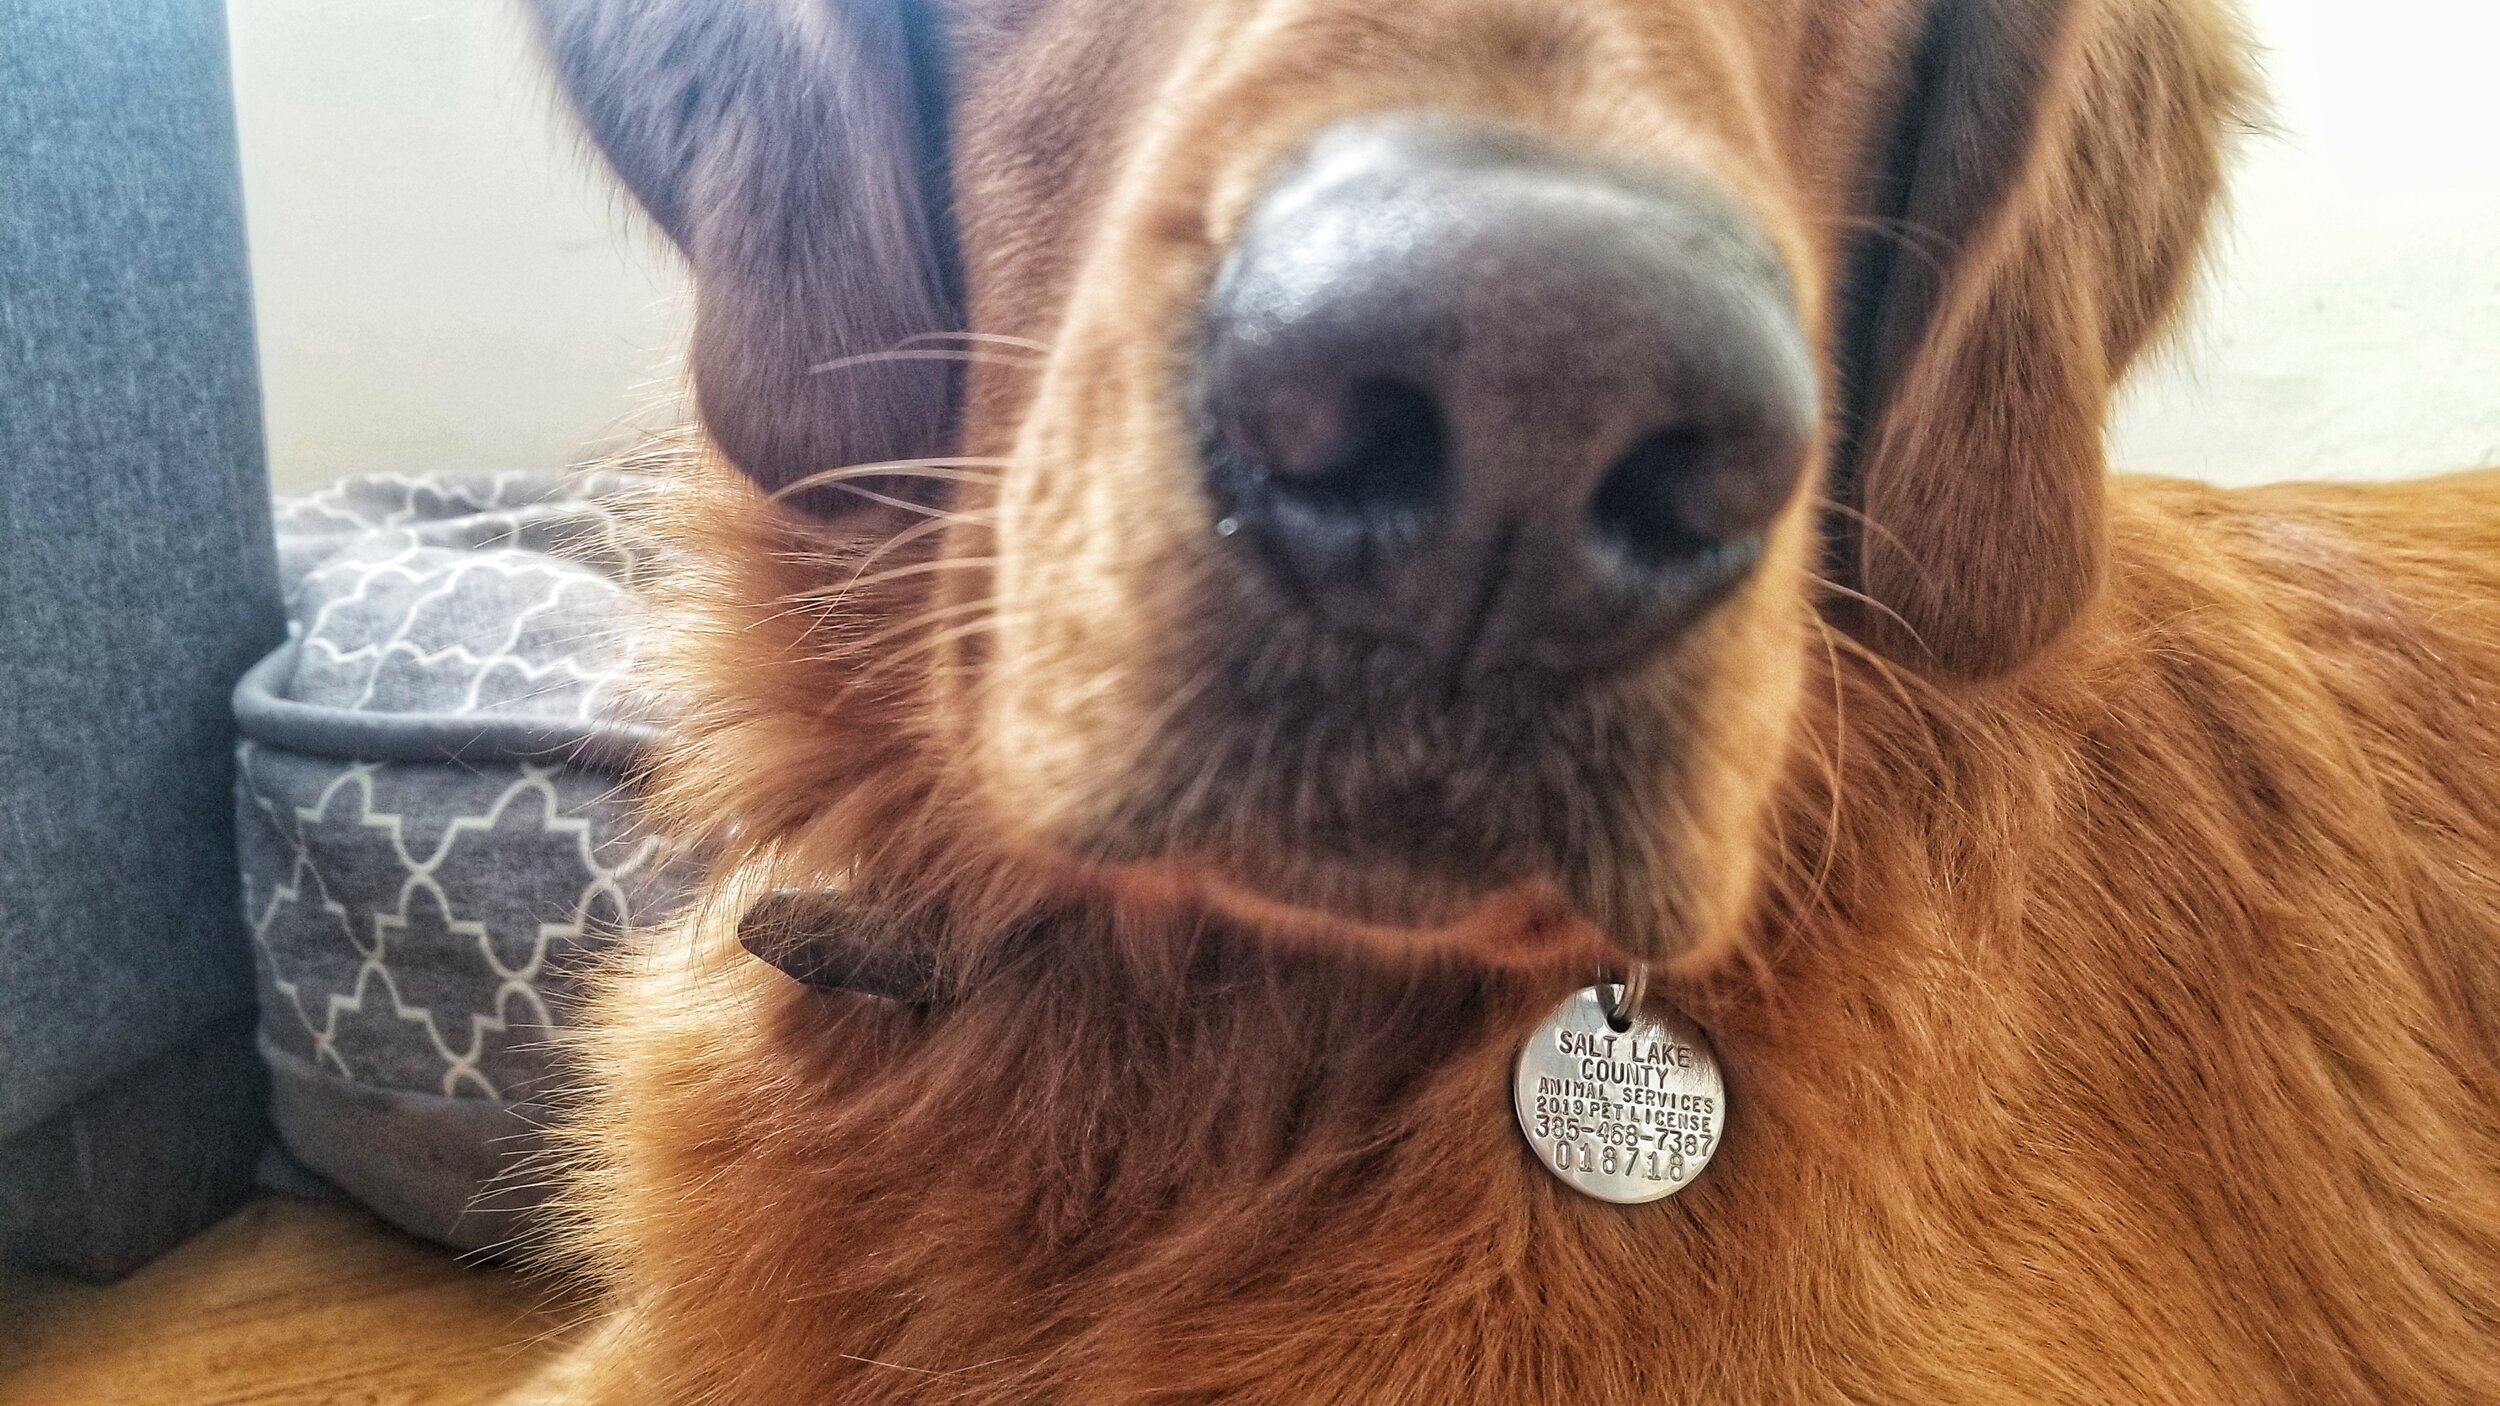 A zoomed in picture on the neck of a golden retriever shows a shiny silver dog license tag